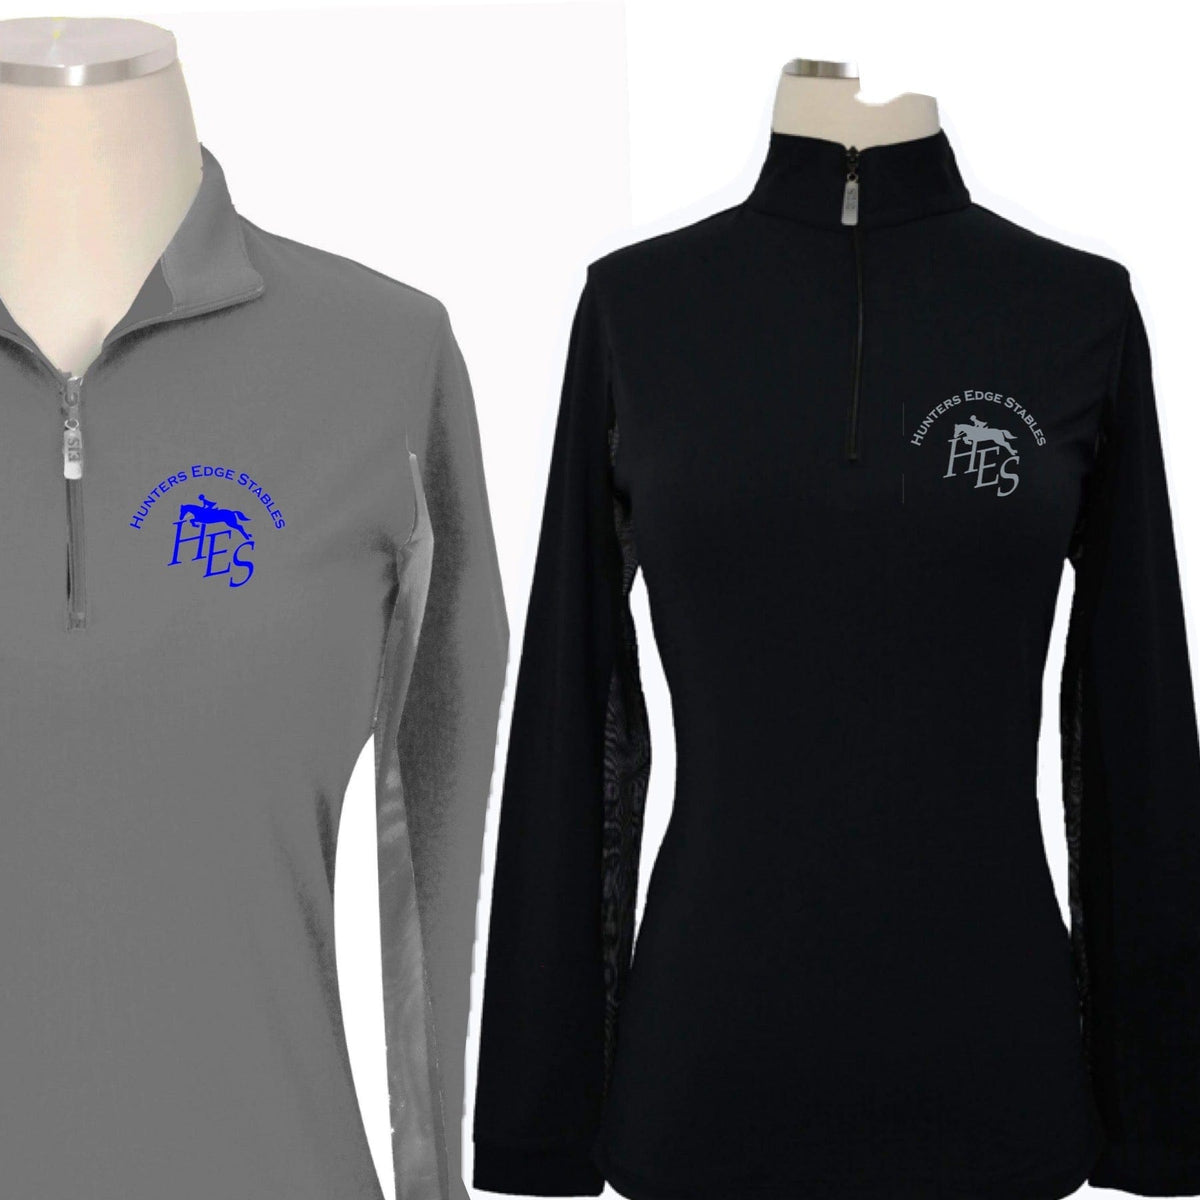 Equestrian Team Apparel Hunters Edge Stables Sun Shirt equestrian team apparel online tack store mobile tack store custom farm apparel custom show stable clothing equestrian lifestyle horse show clothing riding clothes horses equestrian tack store